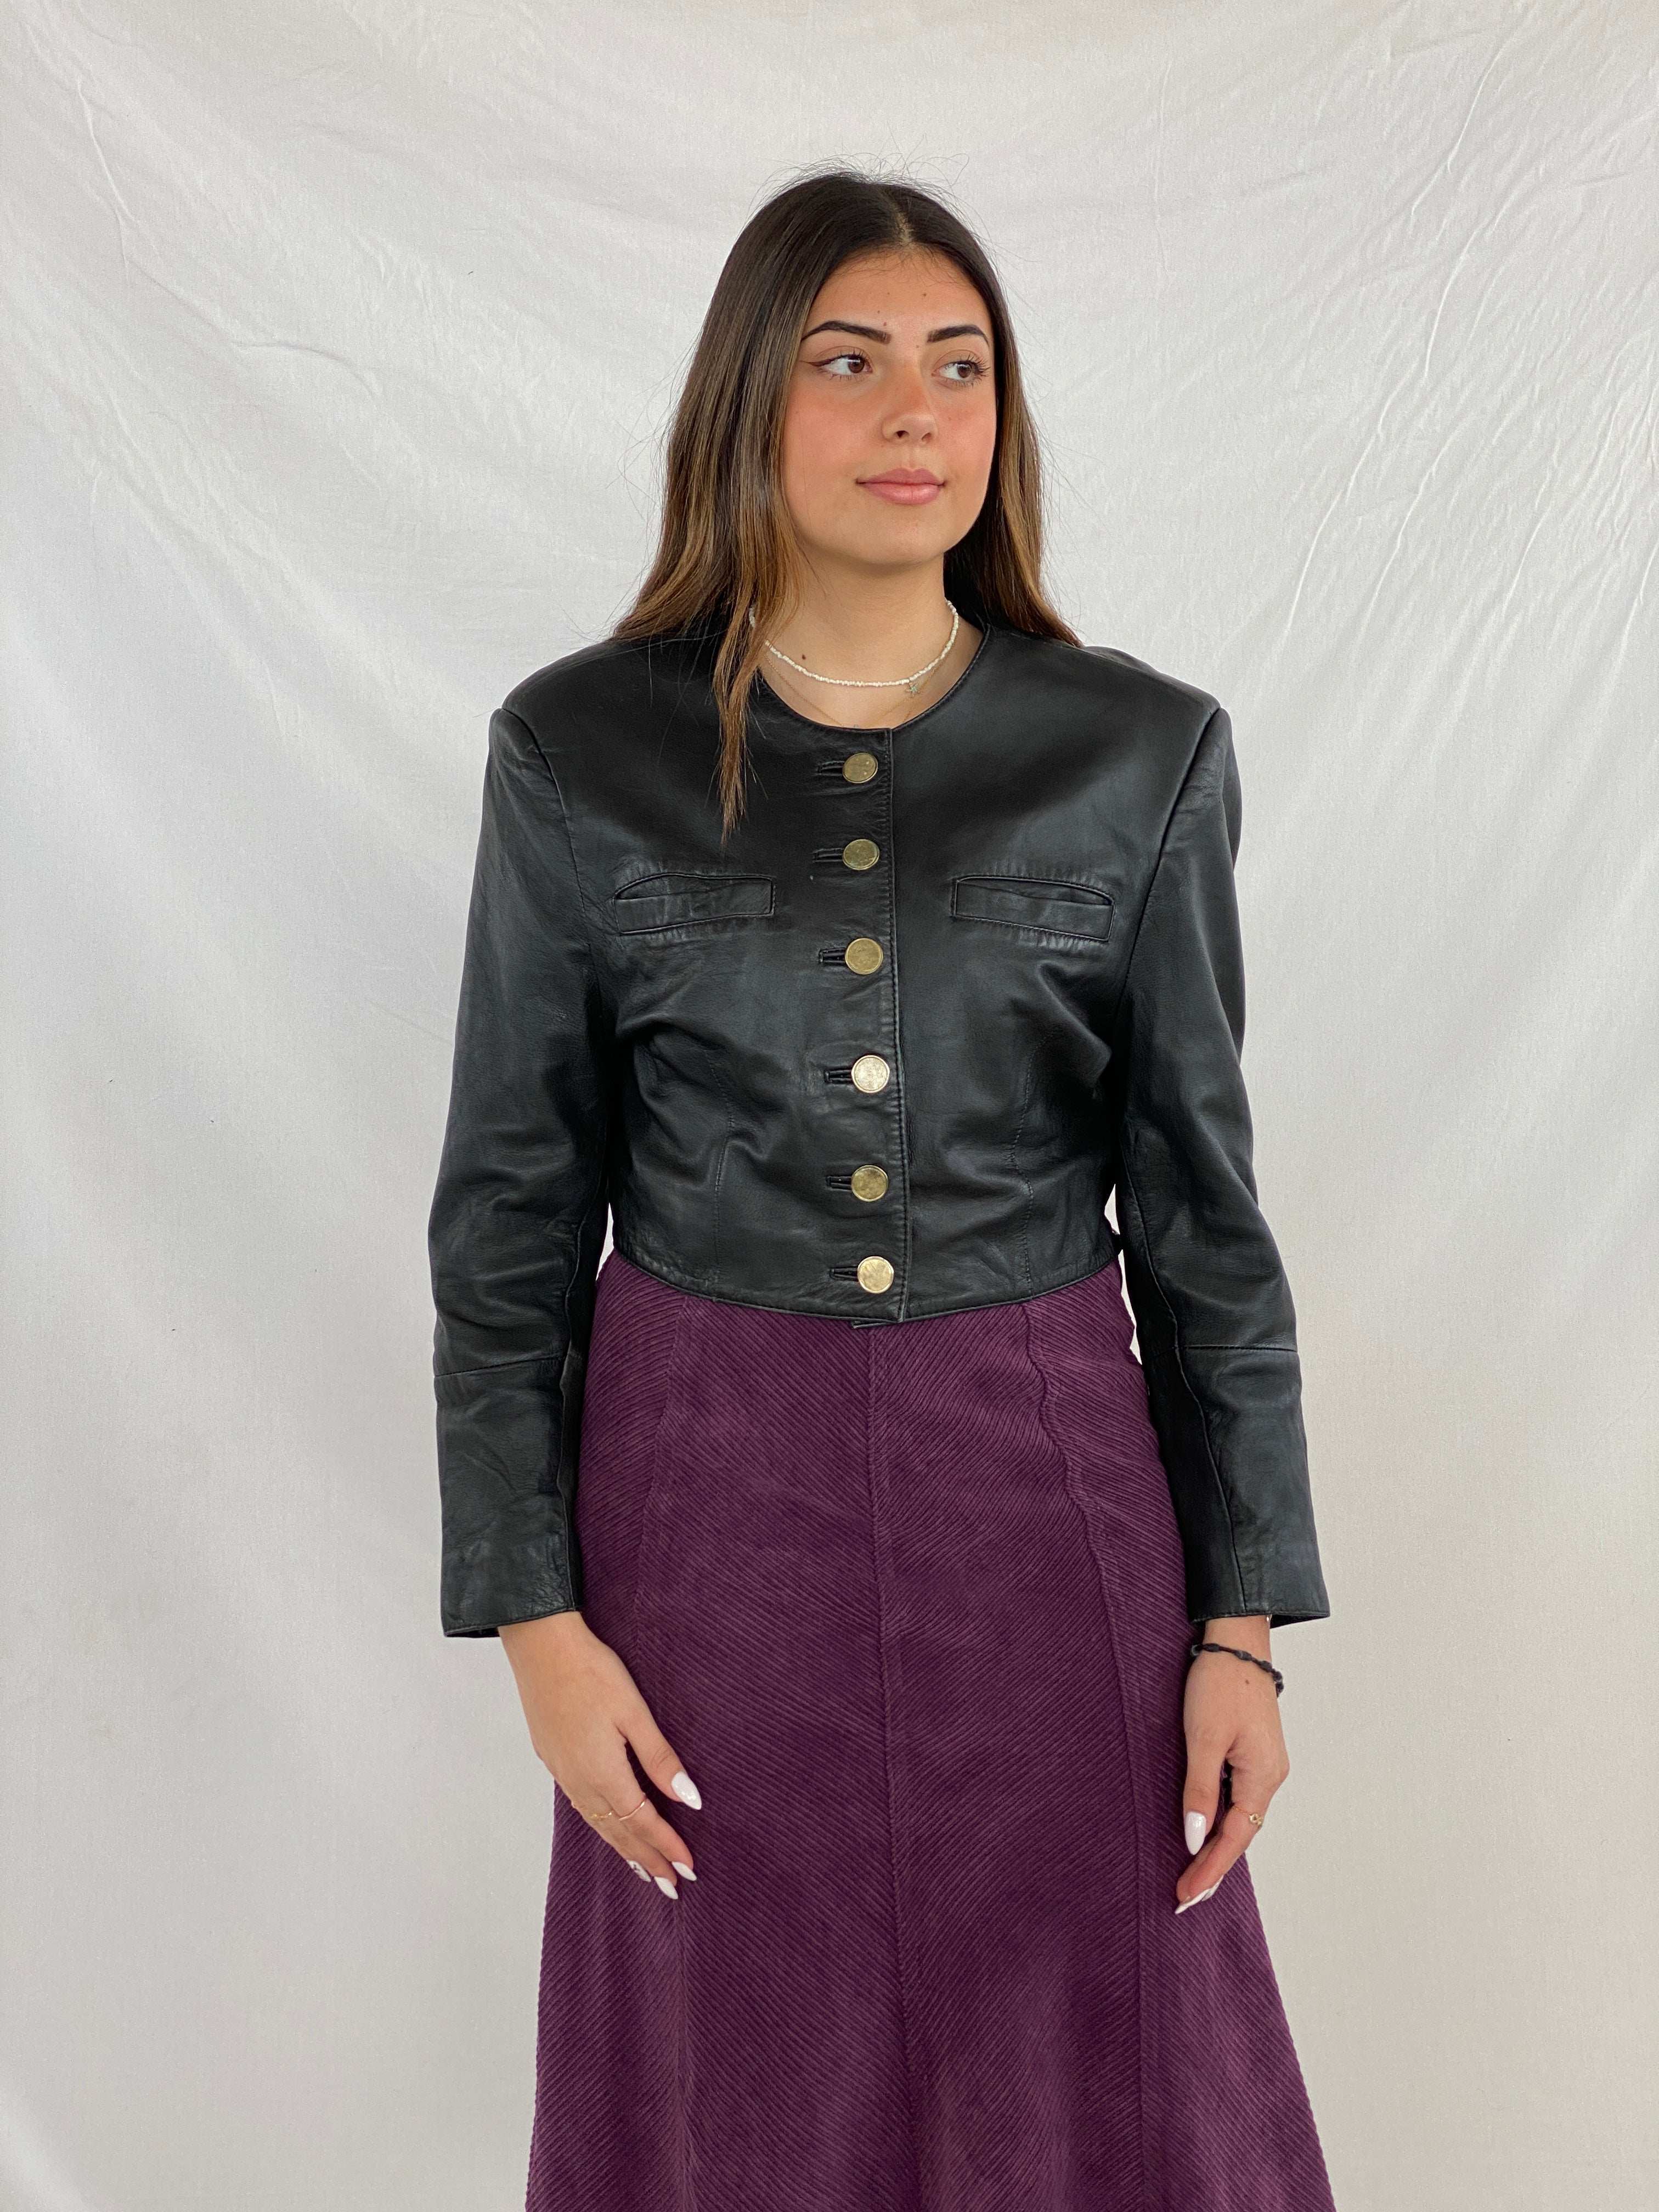 Vintage Gold Buttoned Cropped Genuine Leather Jacket - Balagan Vintage Leather Jacket 90s, genuine leather jacket, Juana, leather jacket, NEW IN